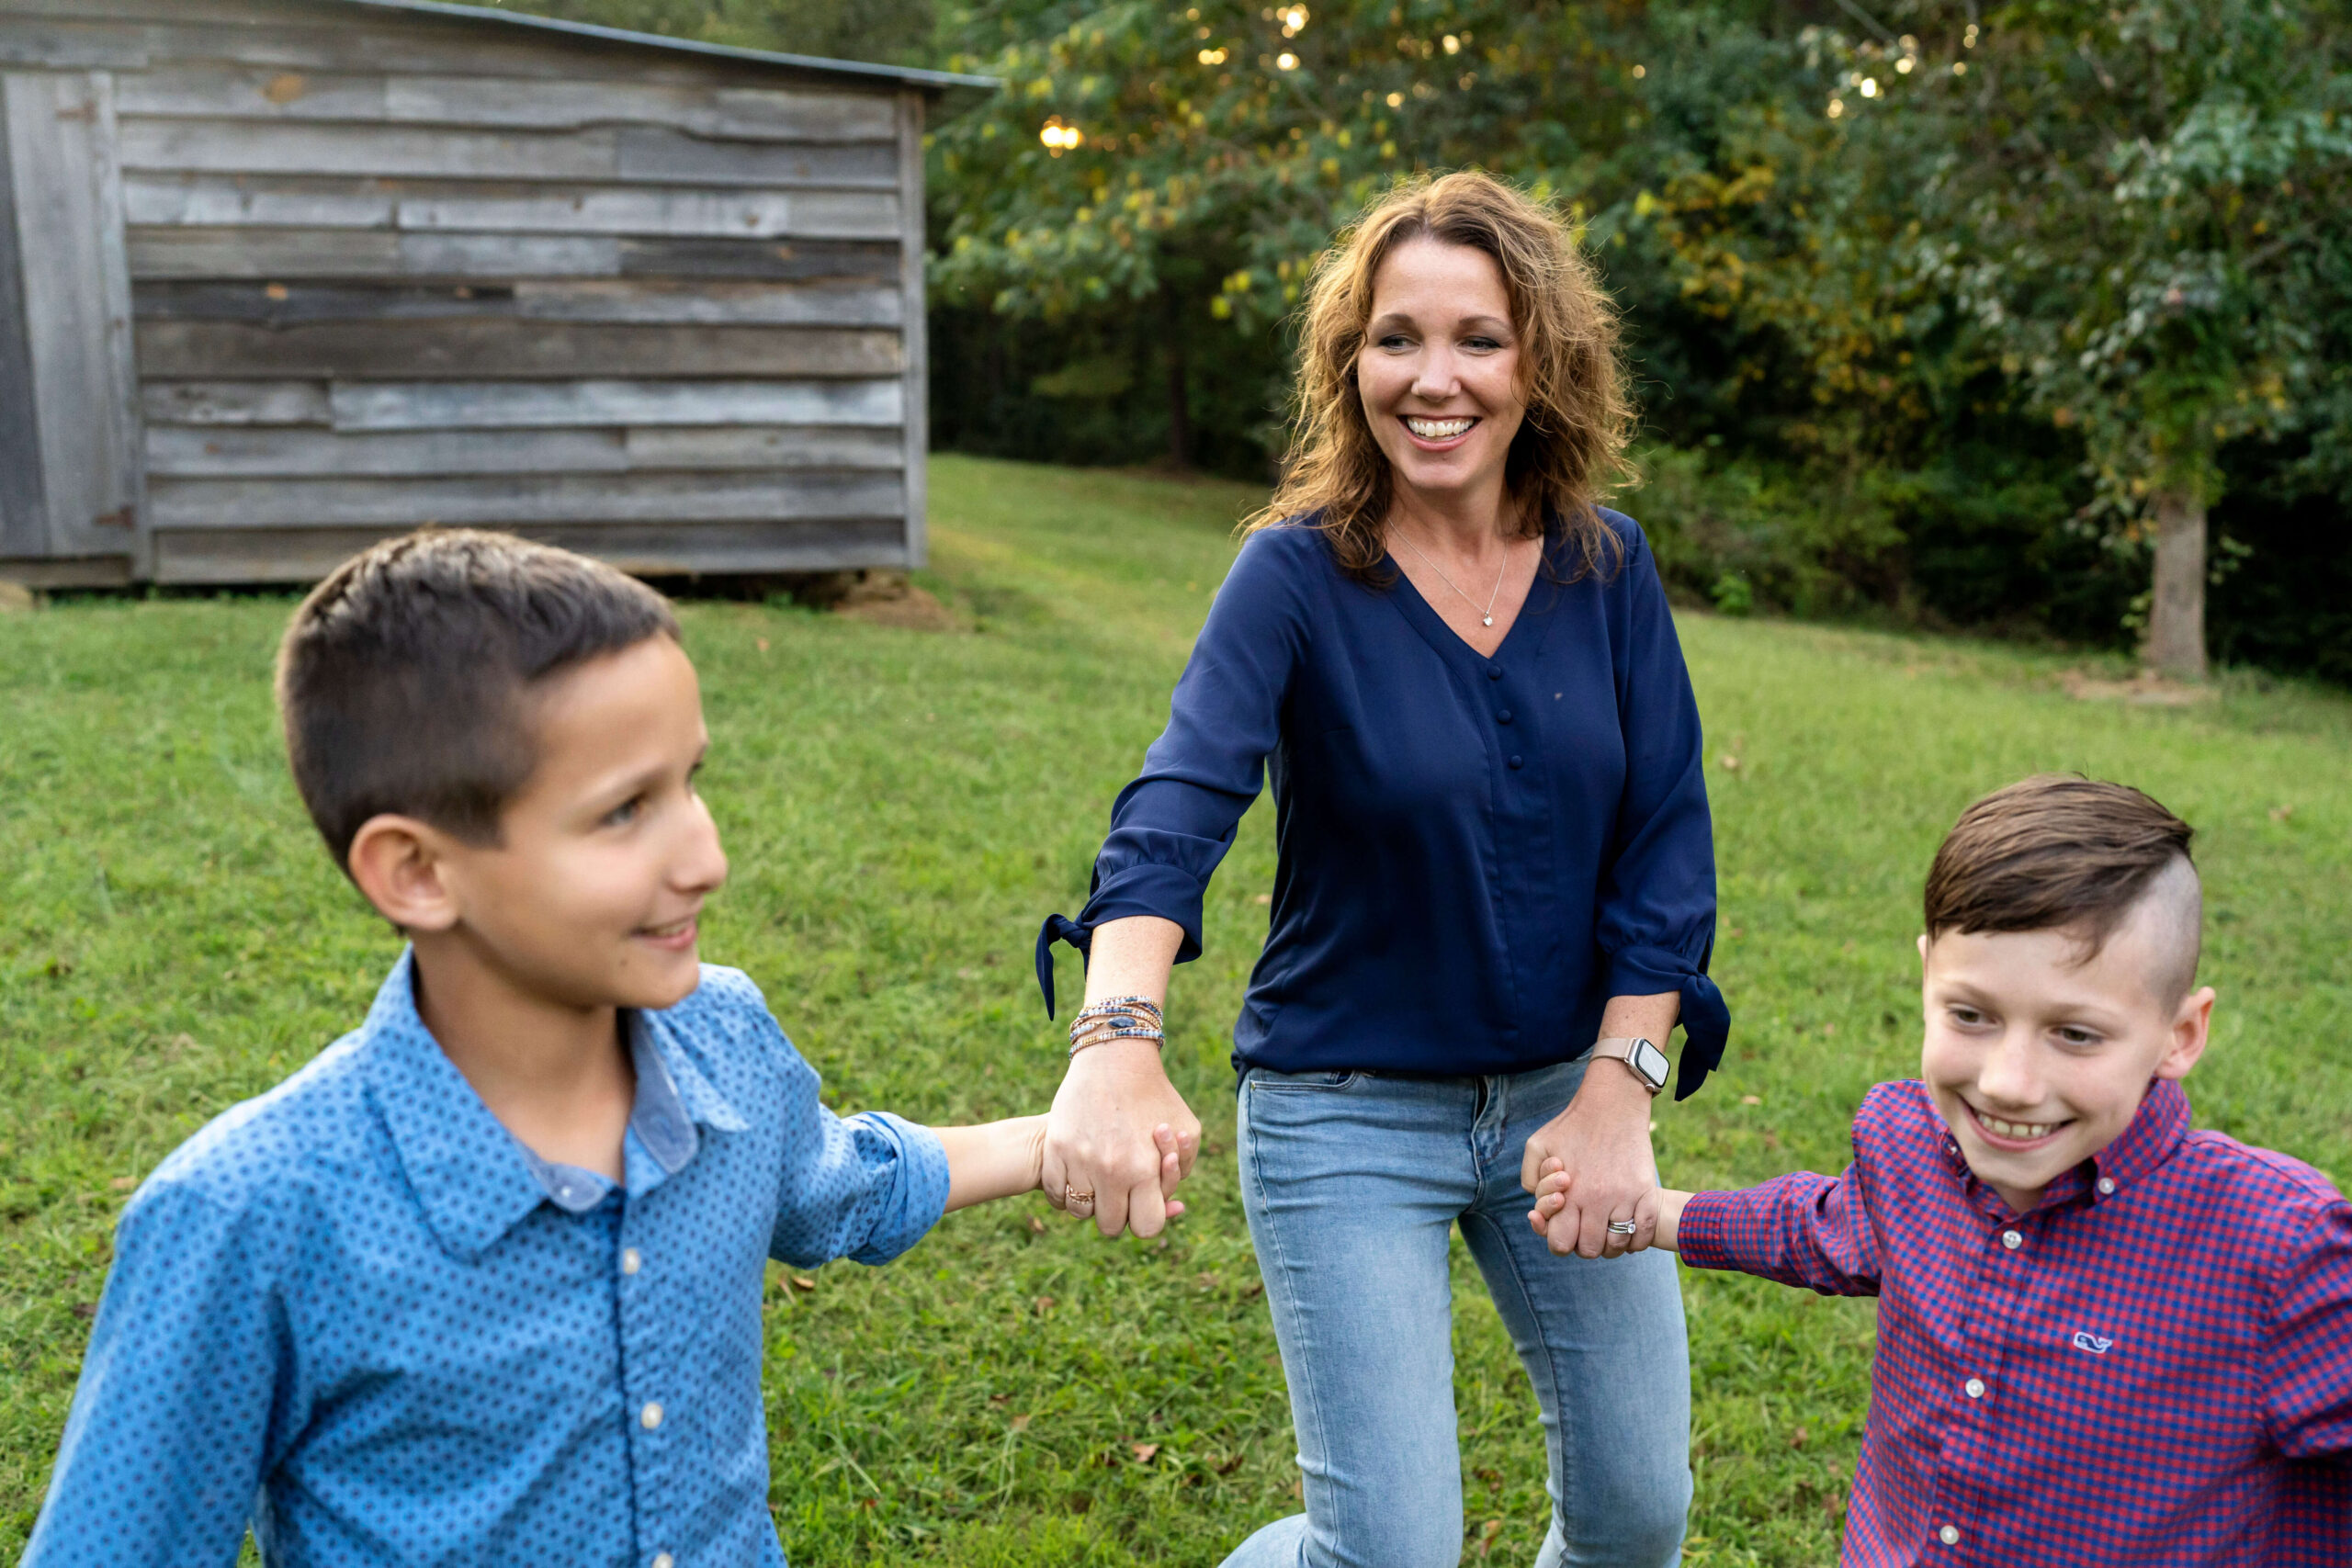 Mother smiling at two sons while holding their hands in a grassy field.